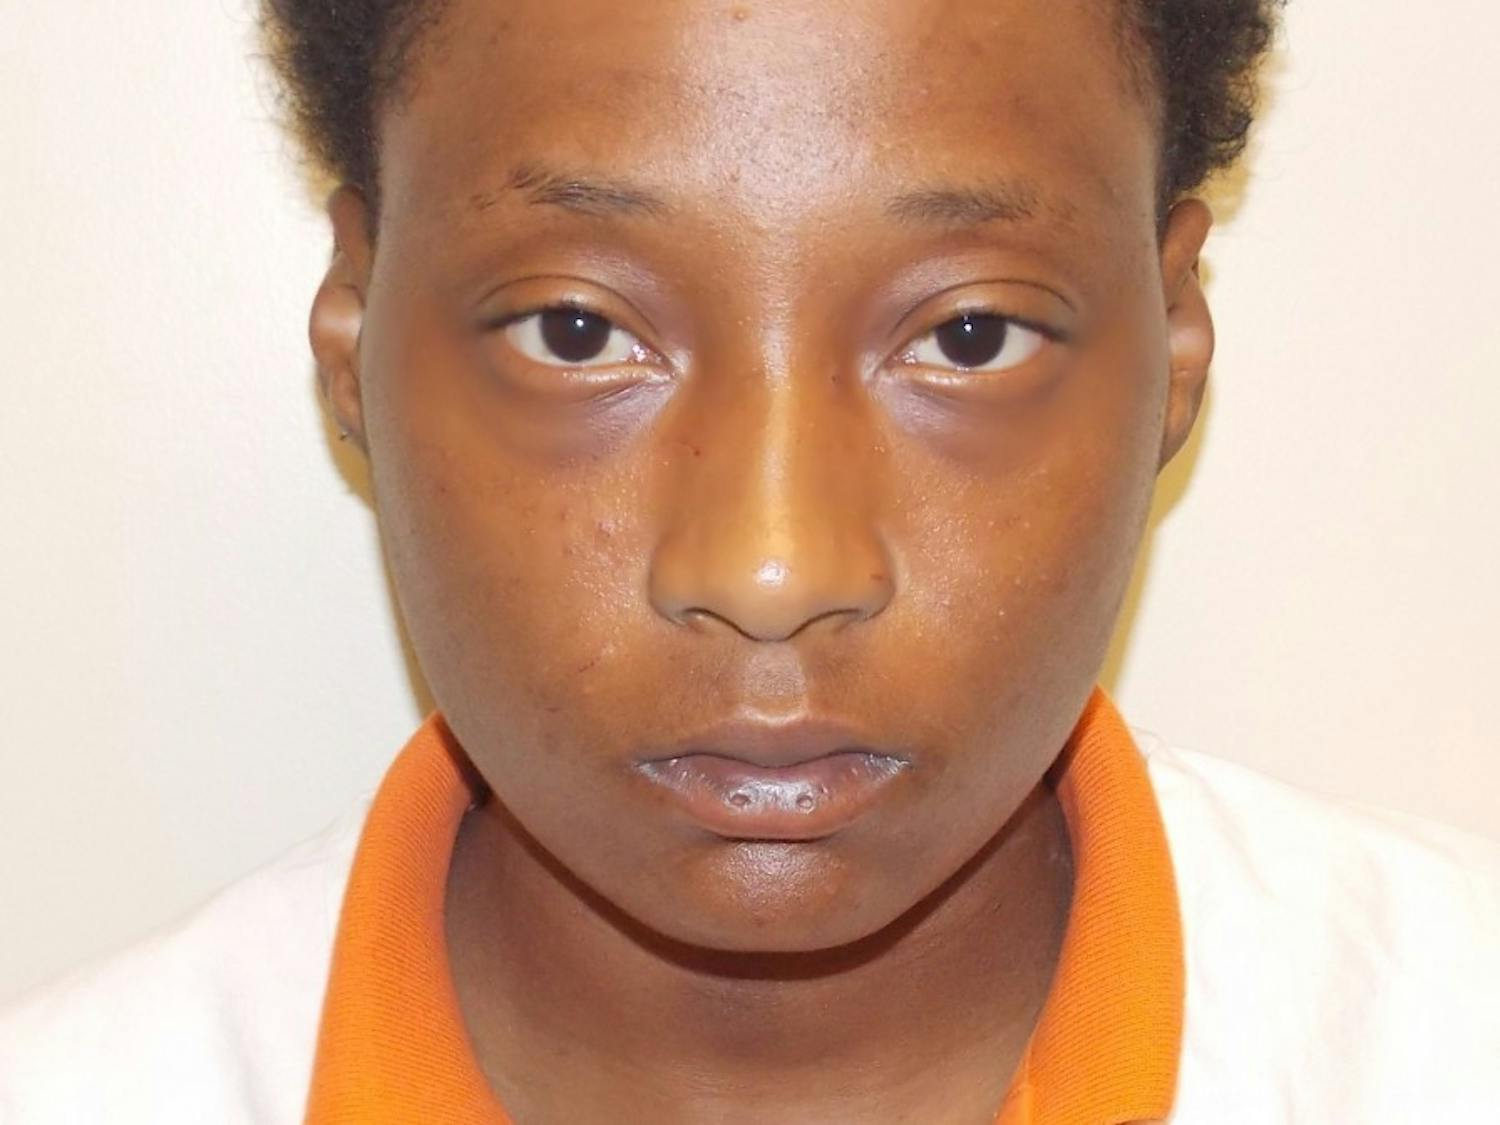 Sanquanetta Hunter, age 23, from Auburn was arrested&nbsp;on charges of&nbsp;burglary&nbsp;and theft of property.